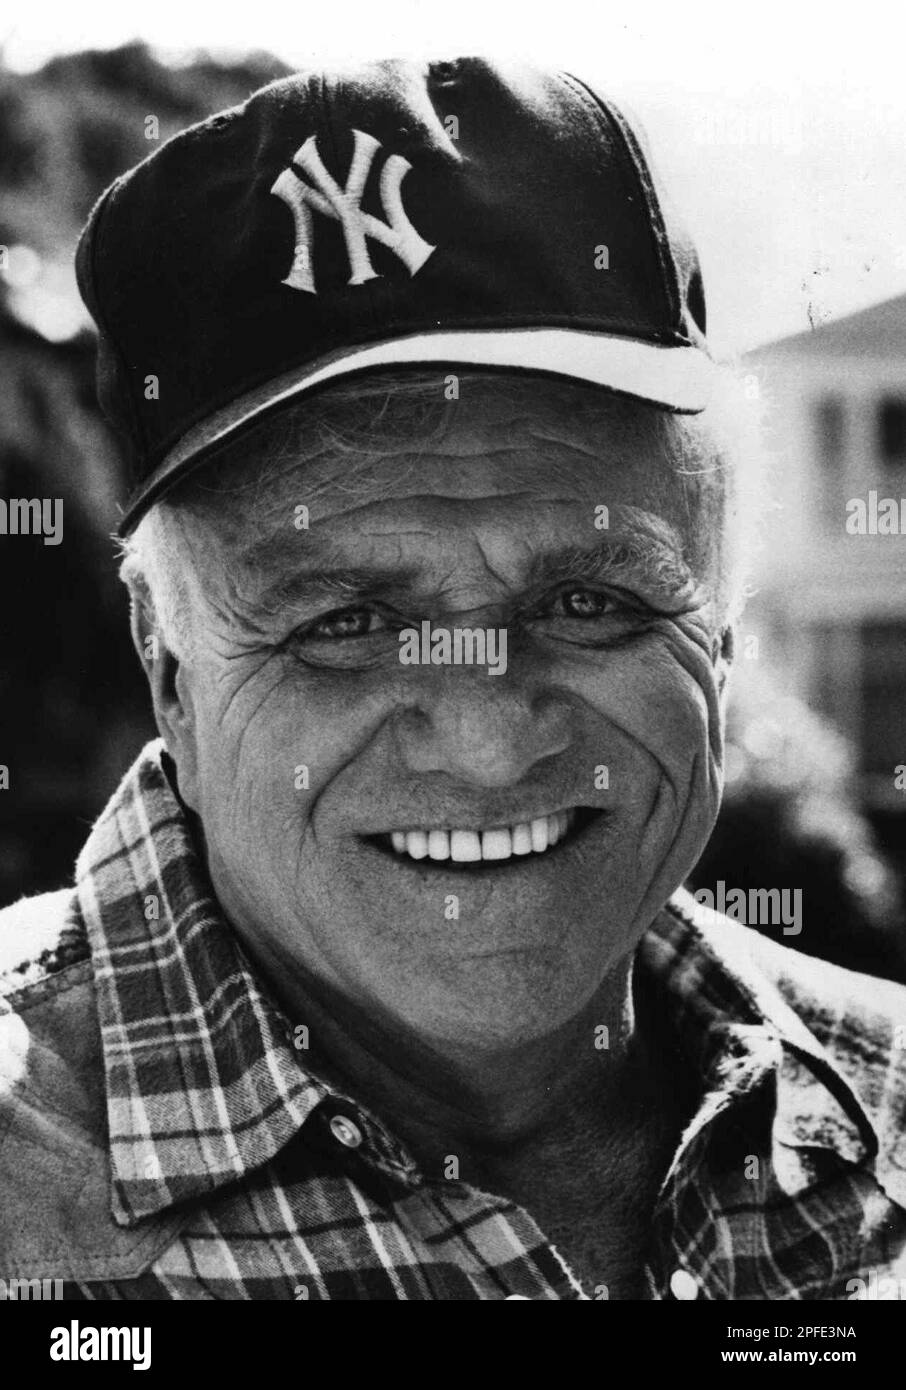 https://c8.alamy.com/comp/2PFE3NA/file-actor-brian-keith-shown-in-this-undated-file-photo-was-found-dead-tuesday-june-24-1997-in-his-home-an-apparent-suicide-officials-said-although-he-appeared-in-films-throughout-the-1950s-and-60s-including-the-parent-trap-in-1961-his-greater-fame-came-through-television-he-starred-as-matt-anders-in-the-1955-56-drama-crusader-and-as-dave-blassingame-in-the-1960-western-the-westerner-before-taking-on-his-signature-role-as-bill-davis-in-family-affair-from-1966-71-he-was-75-ap-photofile-2PFE3NA.jpg